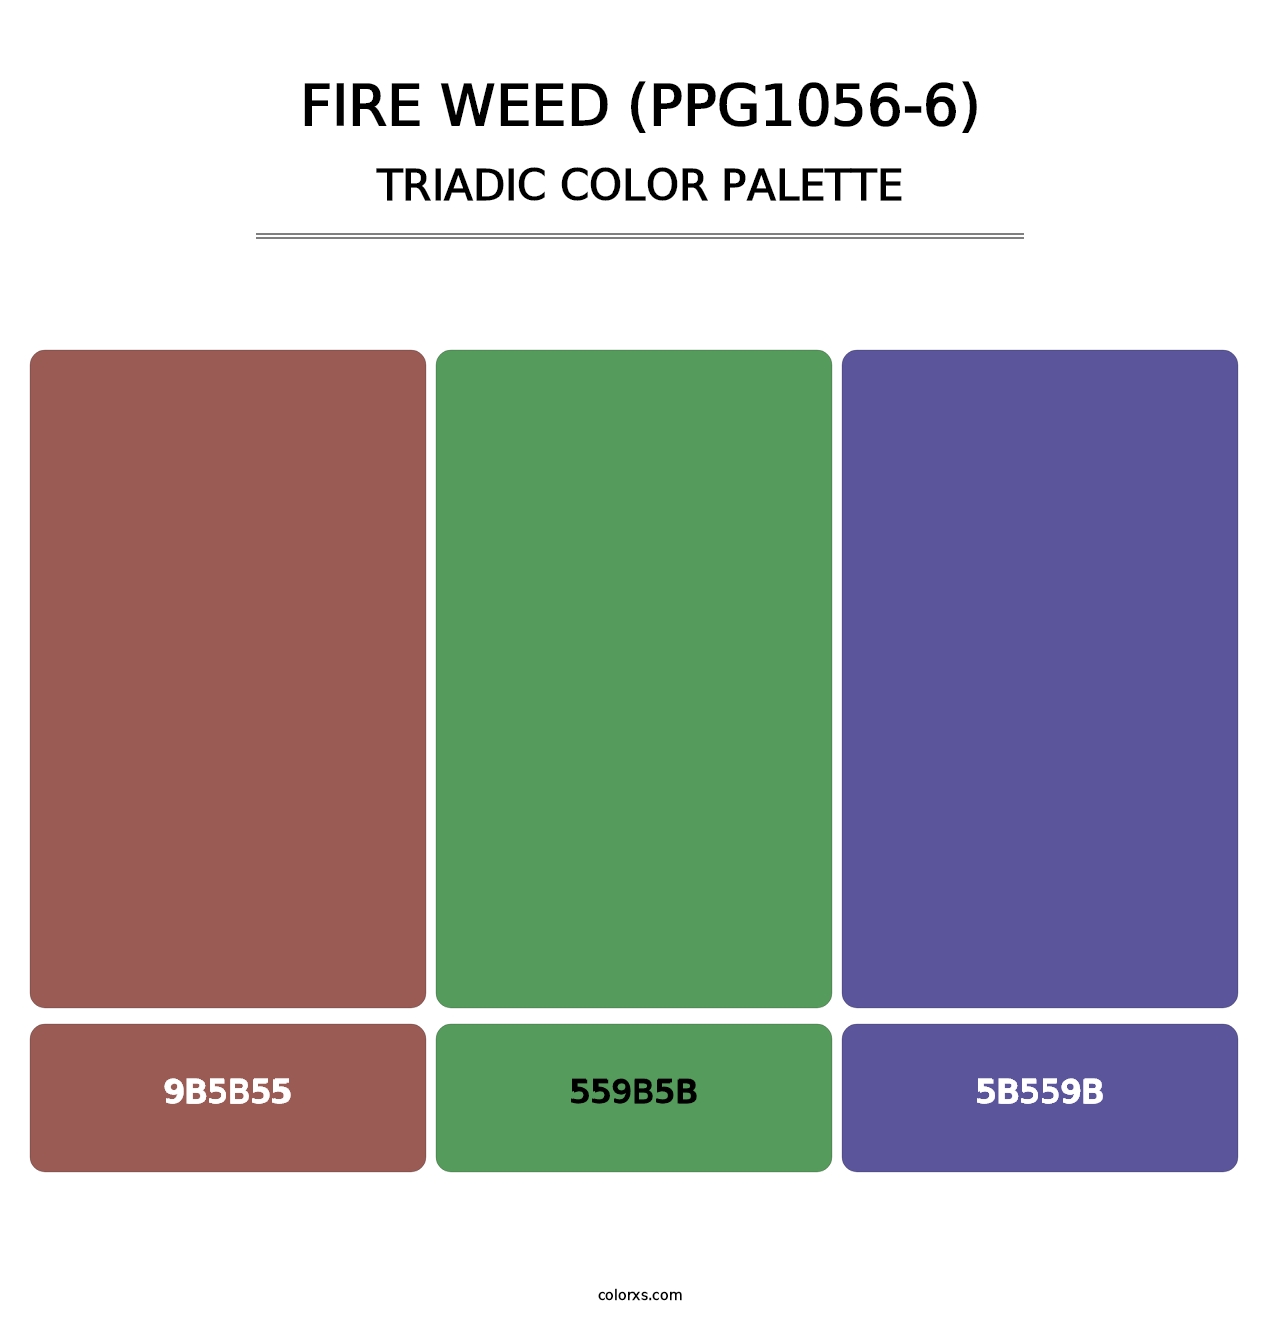 Fire Weed (PPG1056-6) - Triadic Color Palette